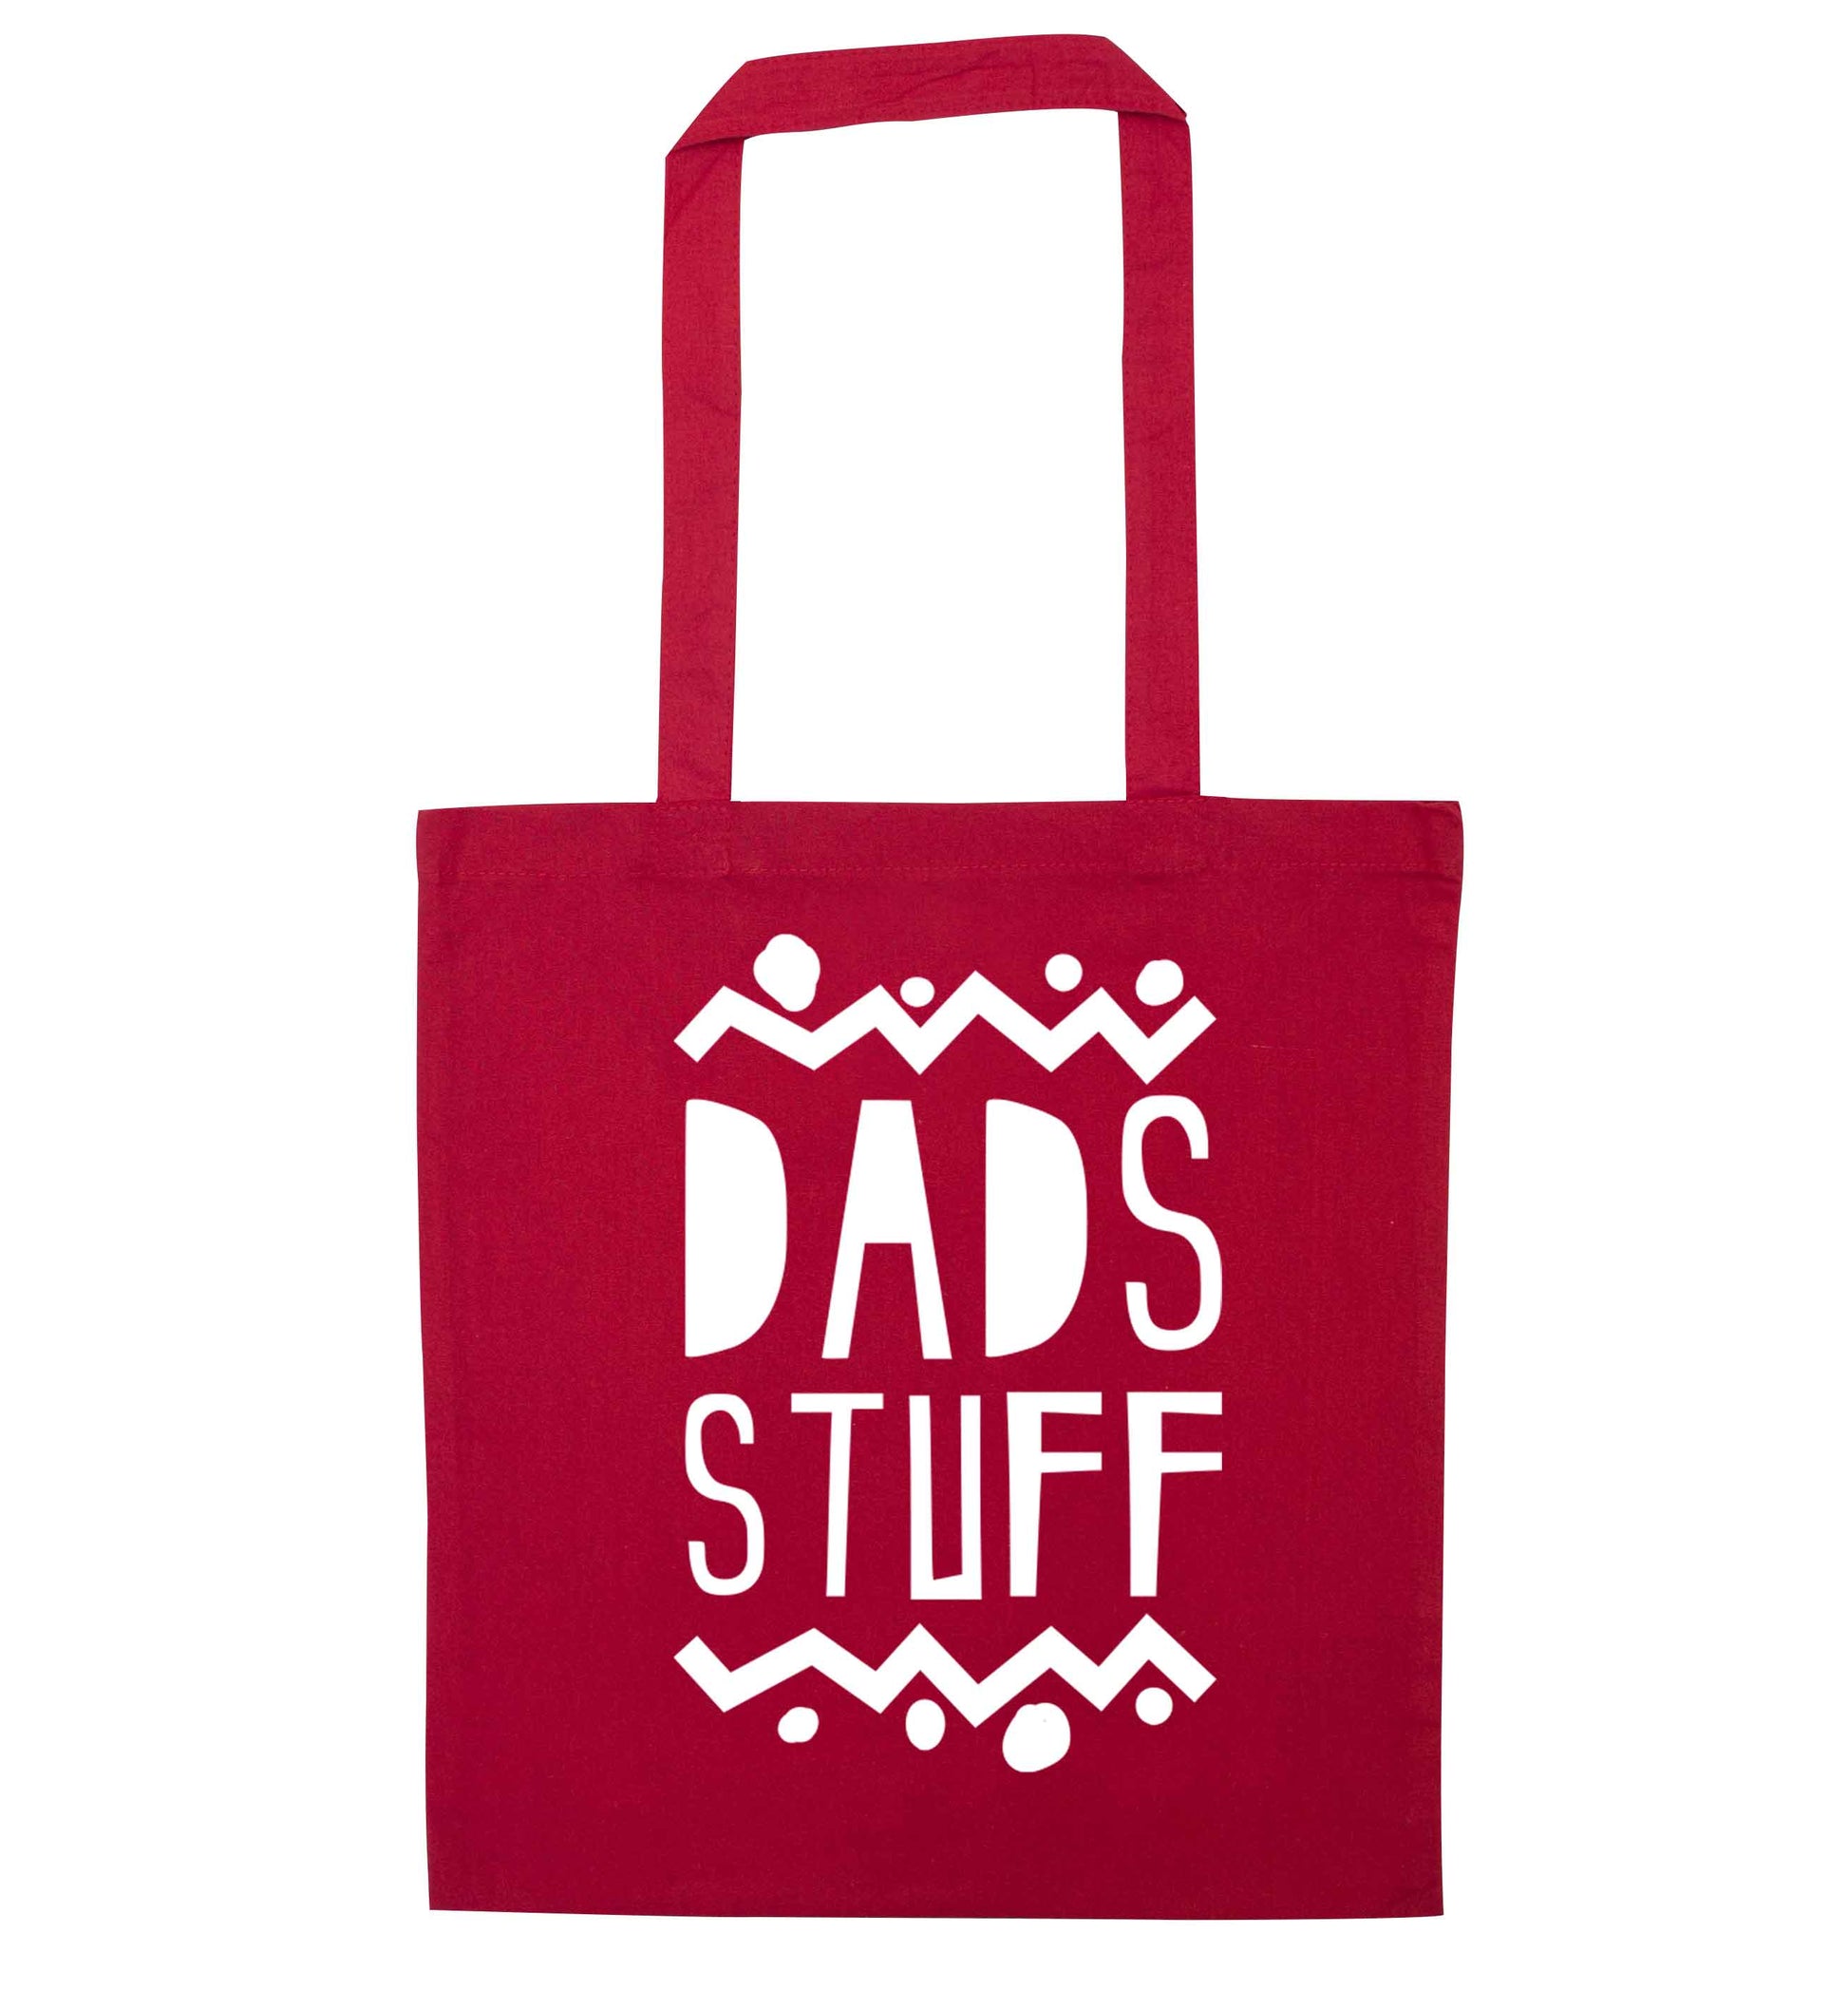 Dads stuff red tote bag